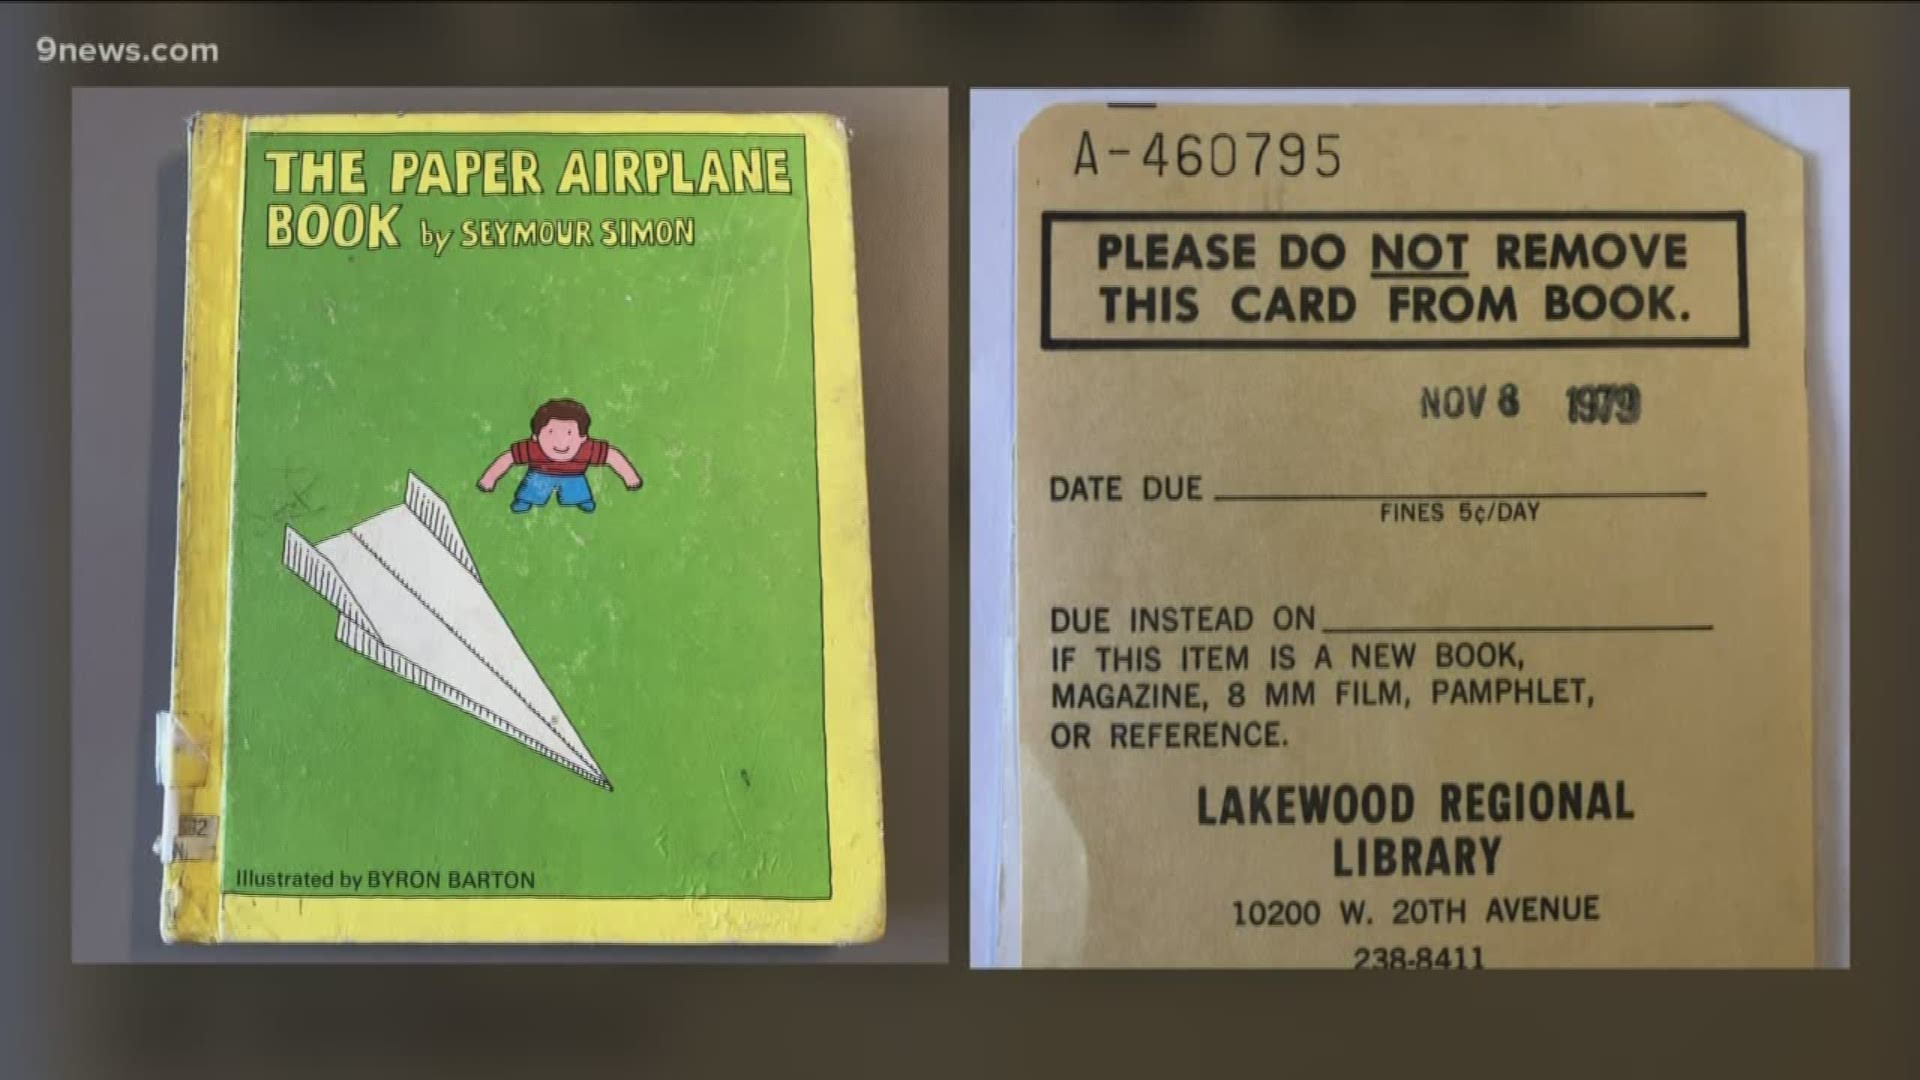 "The Paper Airplane Book" was due Nov. 8, 1979, at Lakewood Regional Library.